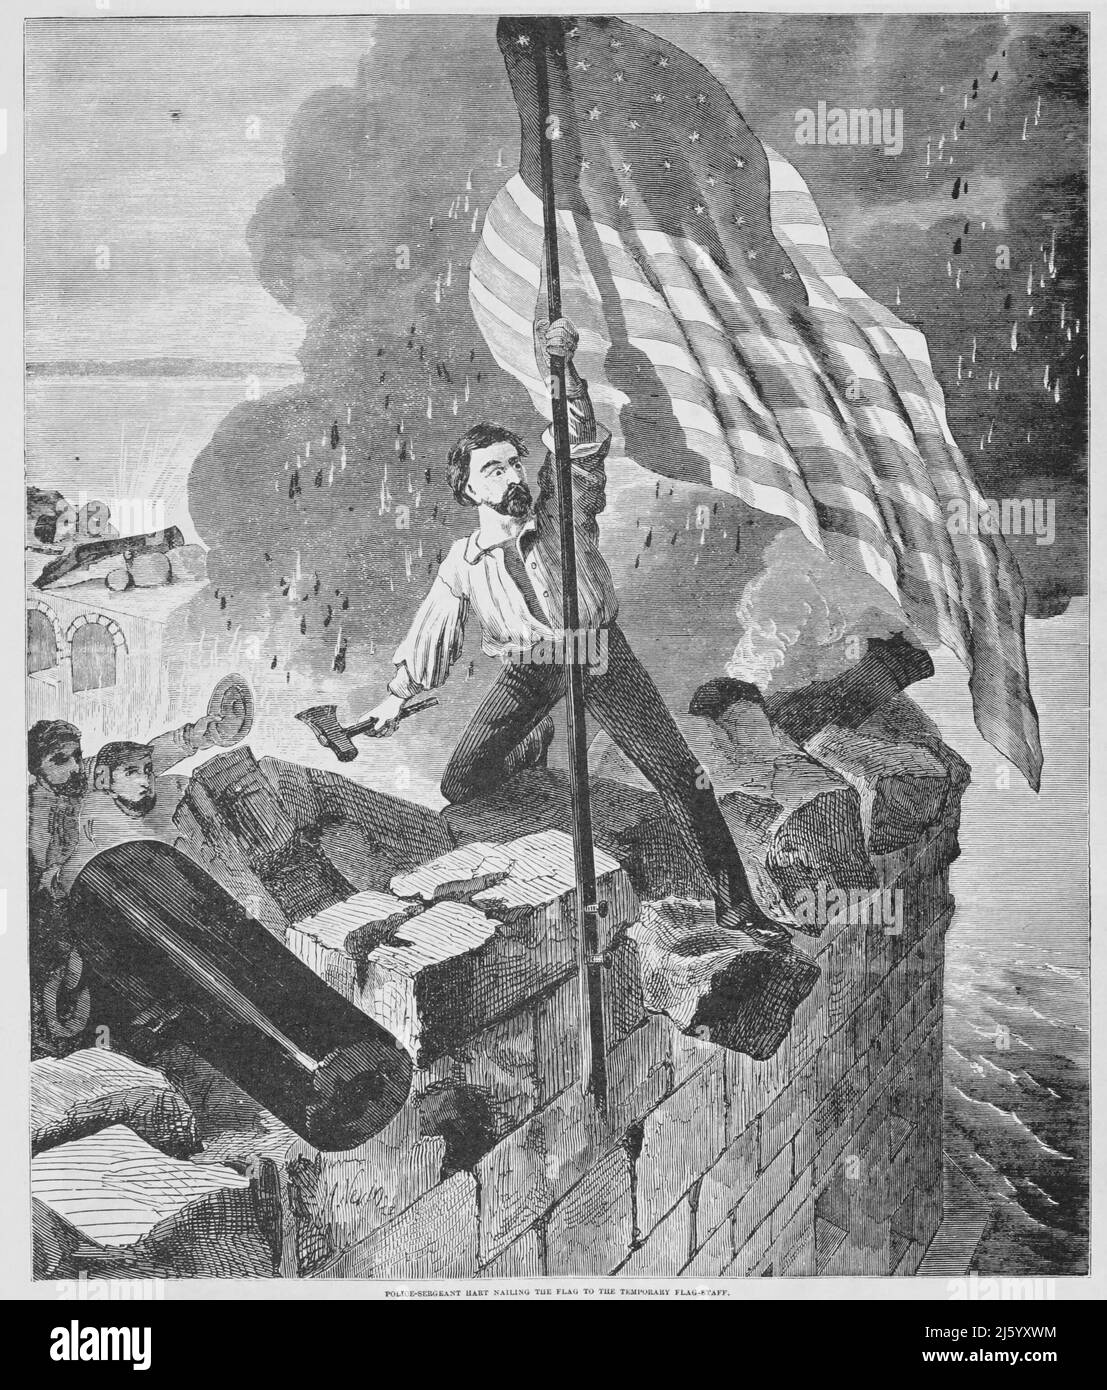 Police Sergeant Hart Nailing the Flag to the Temporary Flag-Staff at the Battle of Fort Sumter in the American Civil War. 19th century illustration Stock Photo